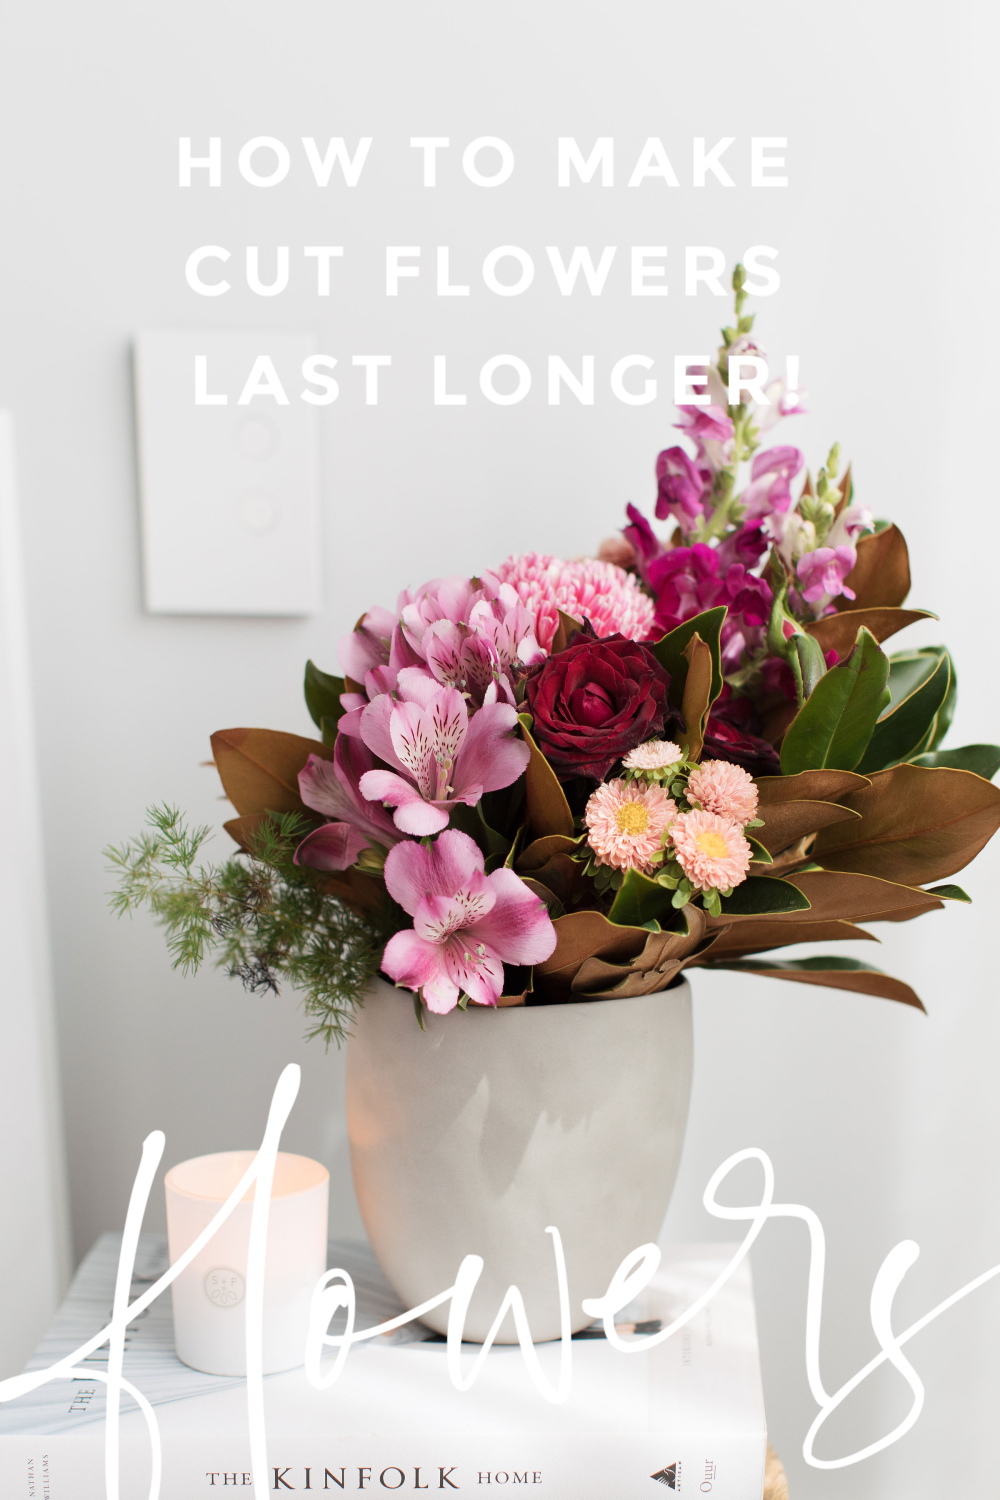 Extend the life of your flowers